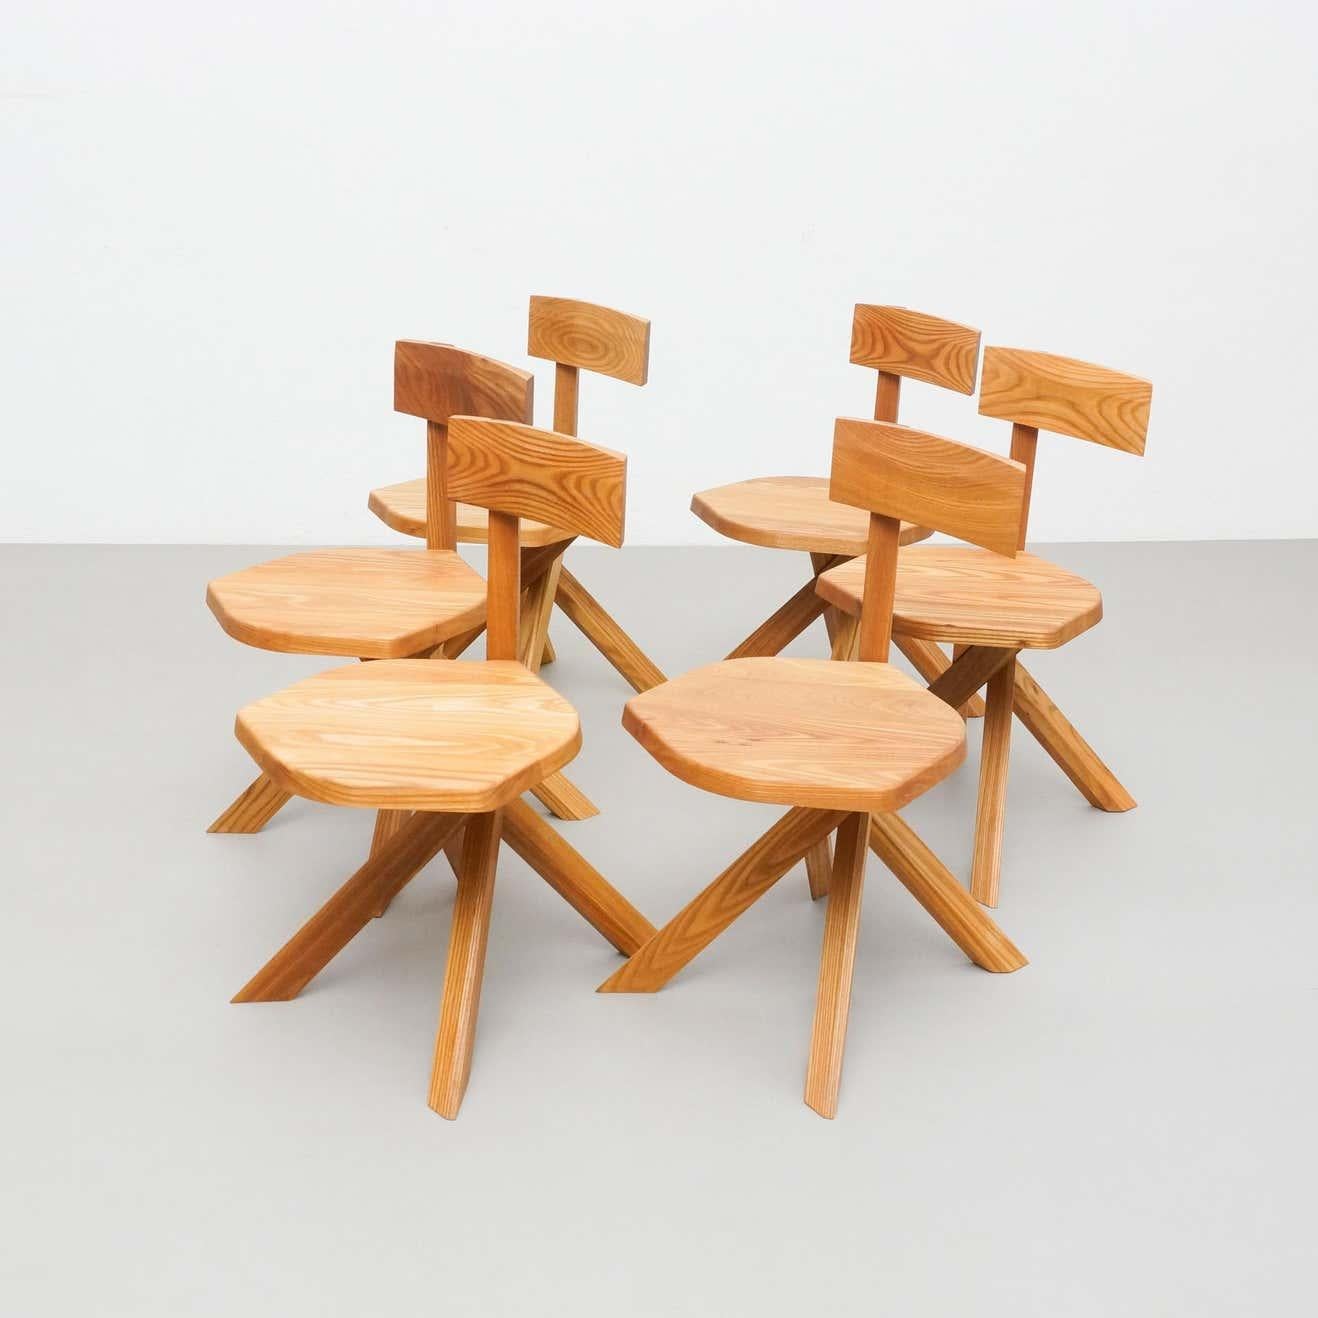 Set of six chairs designed by Pierre Chapo, circa 1960.
Manufactured by Chapo Creation in France, 2020.
Stamped solid elmwood.

In good original condition, with minor wear consistent with age and use, preserving a beautiful patina.

Pierre Chapo is